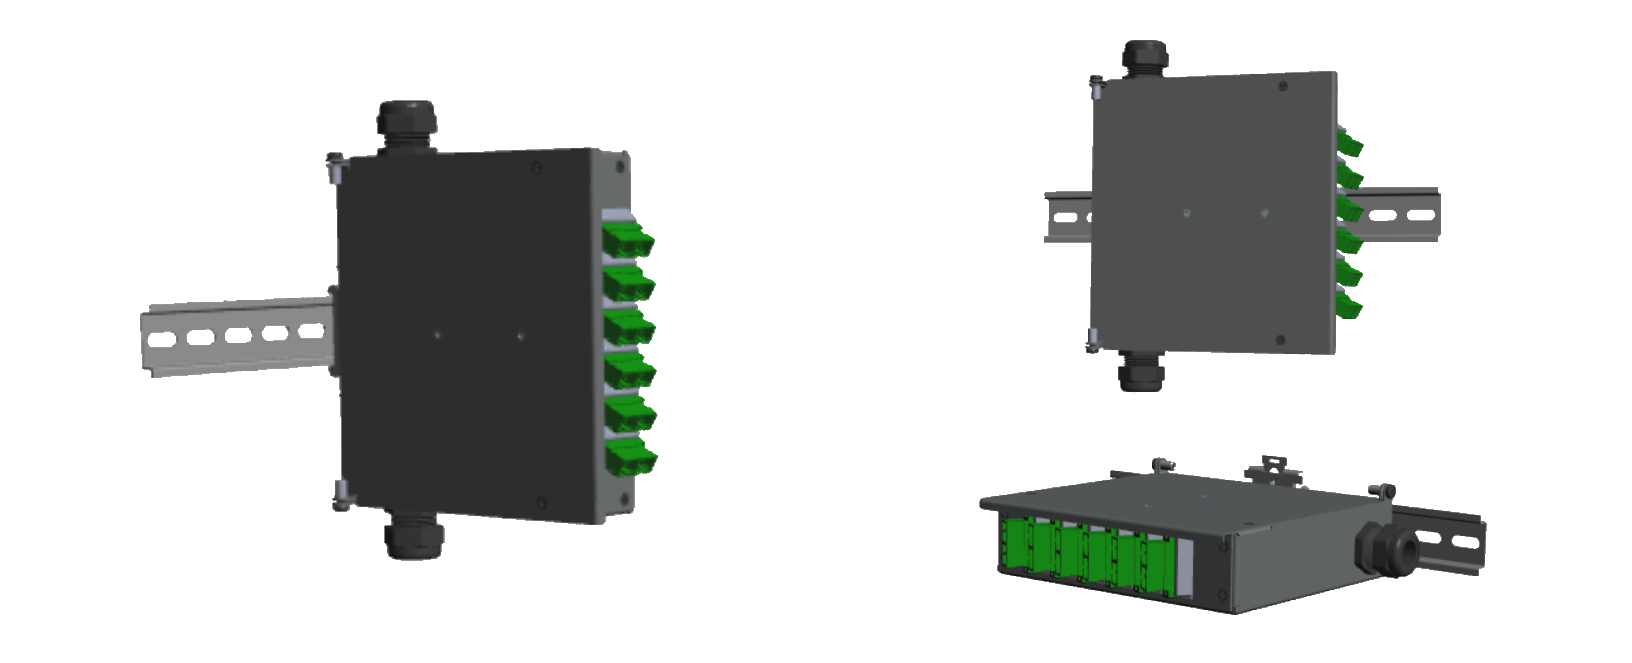 P1-SC-DX 12 FO Termination Box Mounting Options